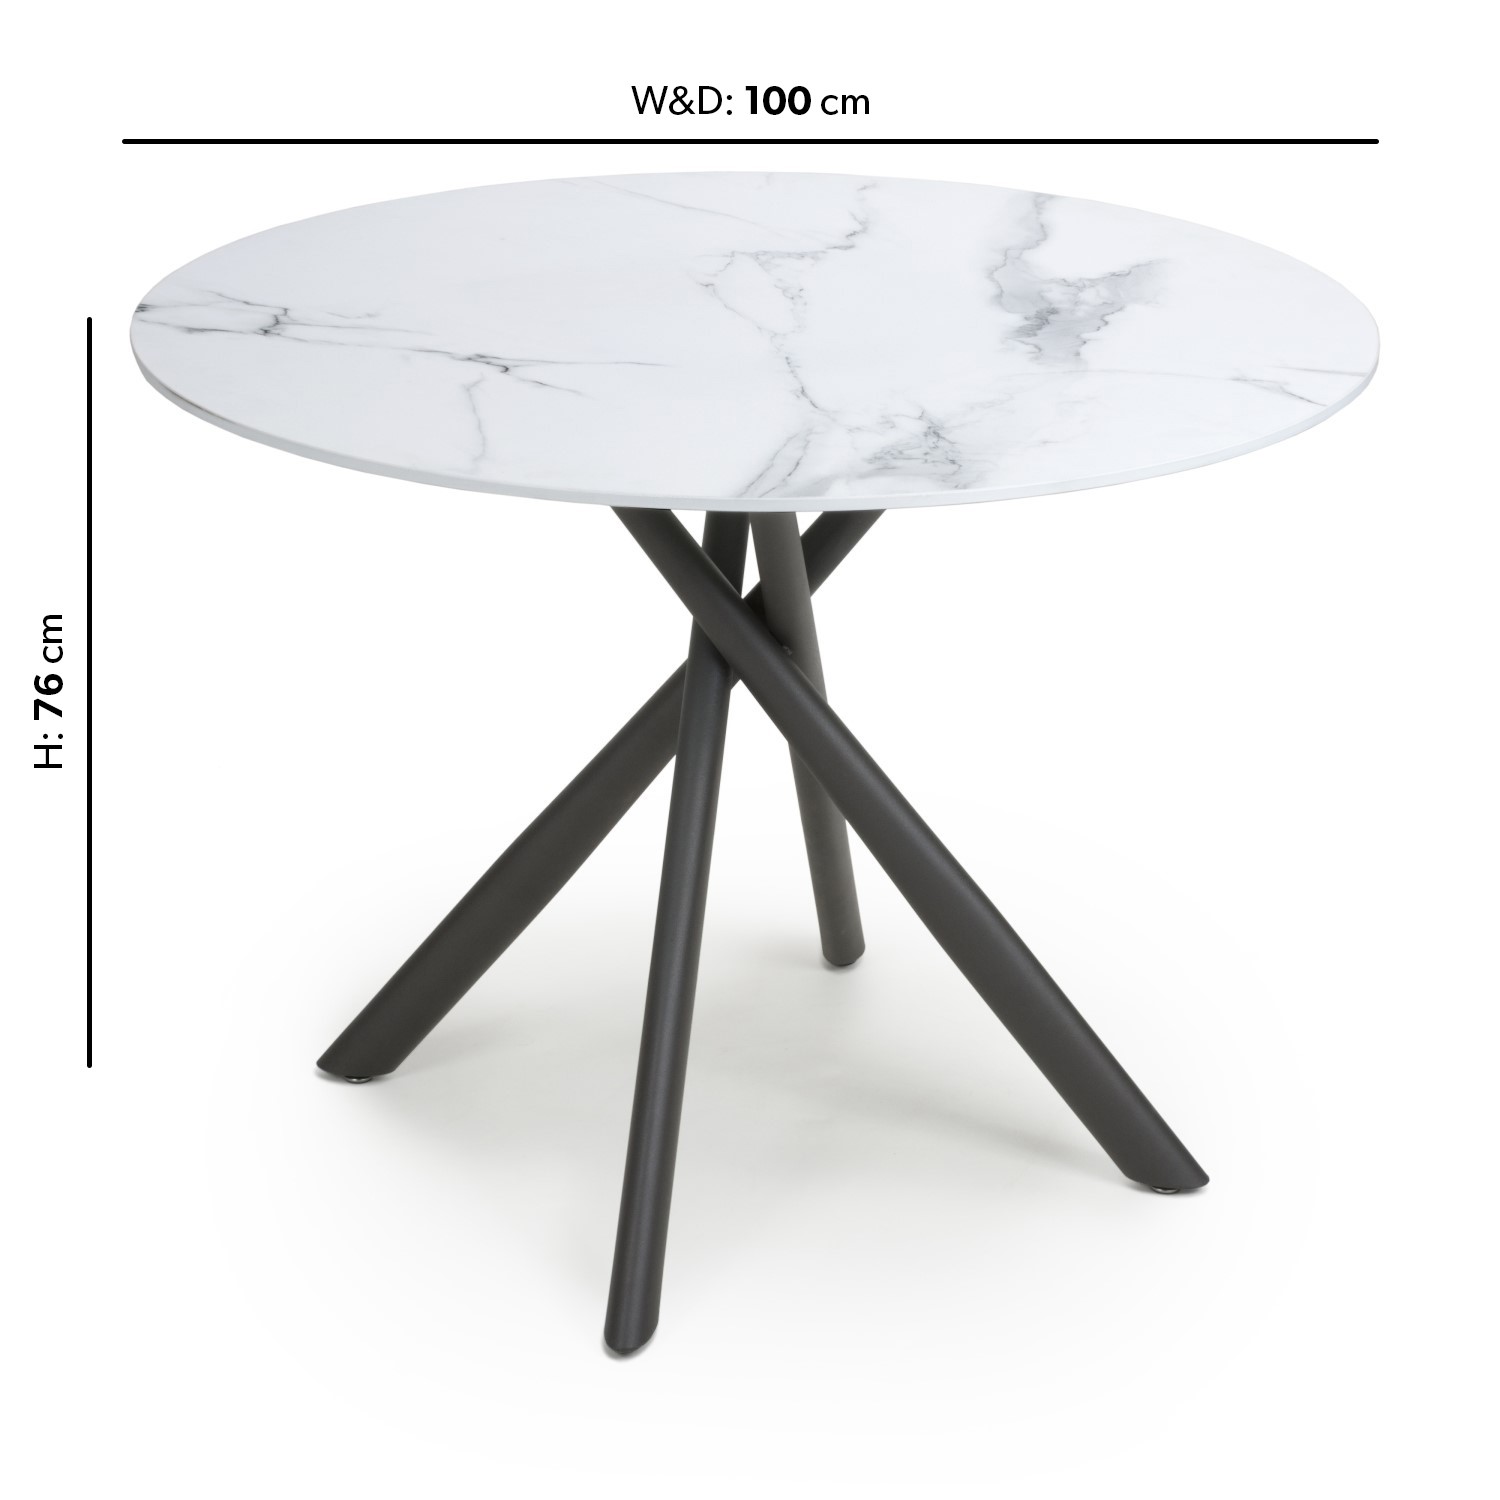 Read more about Small round white marble effect dining table seats 4 avesta